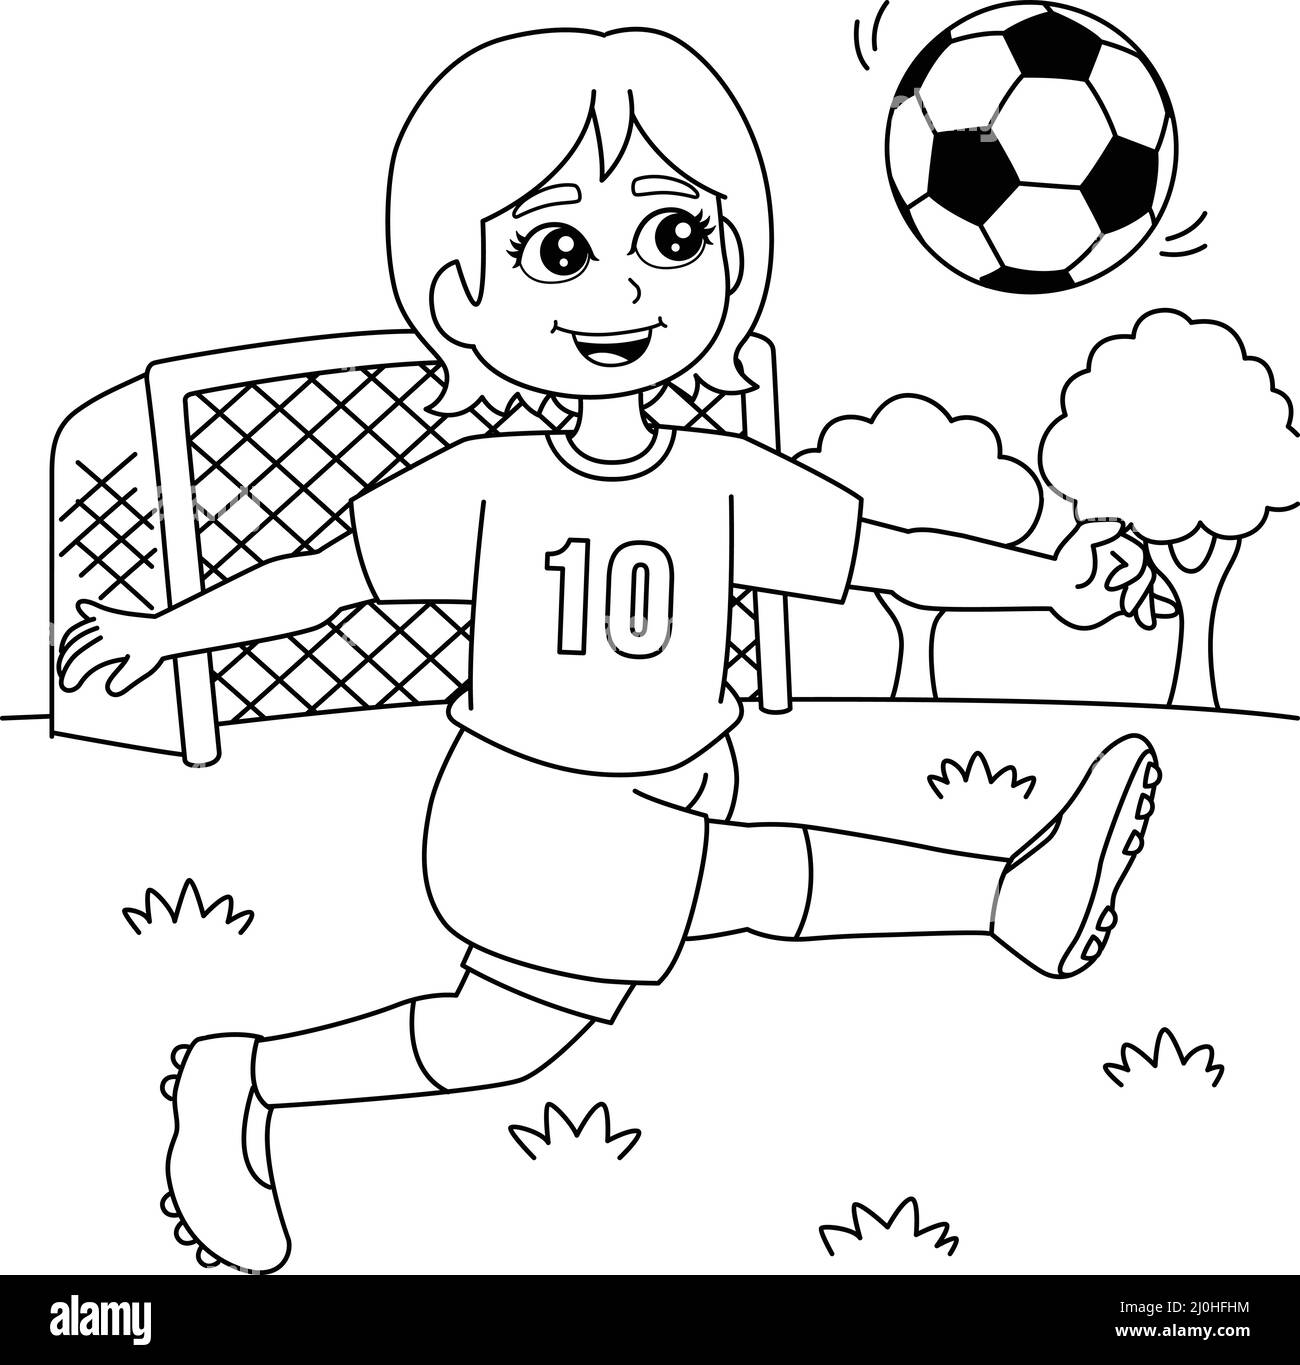 Girl Playing Soccer Coloring Page for Kids Stock Vector Image ...